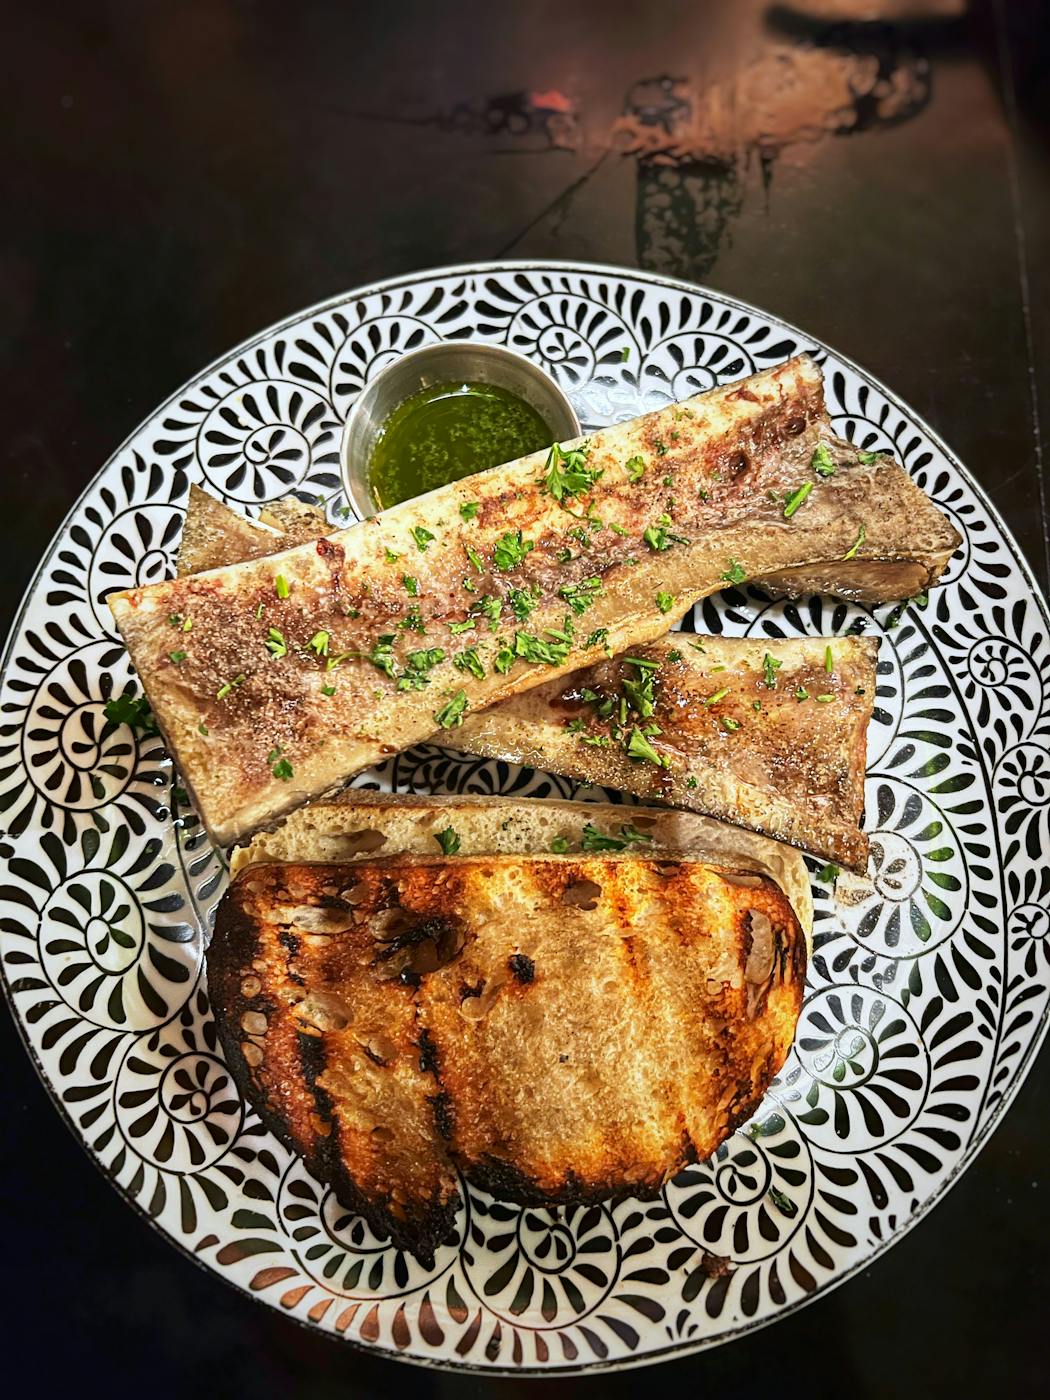 Bone marrow done right at Stepchld in Minneapolis.